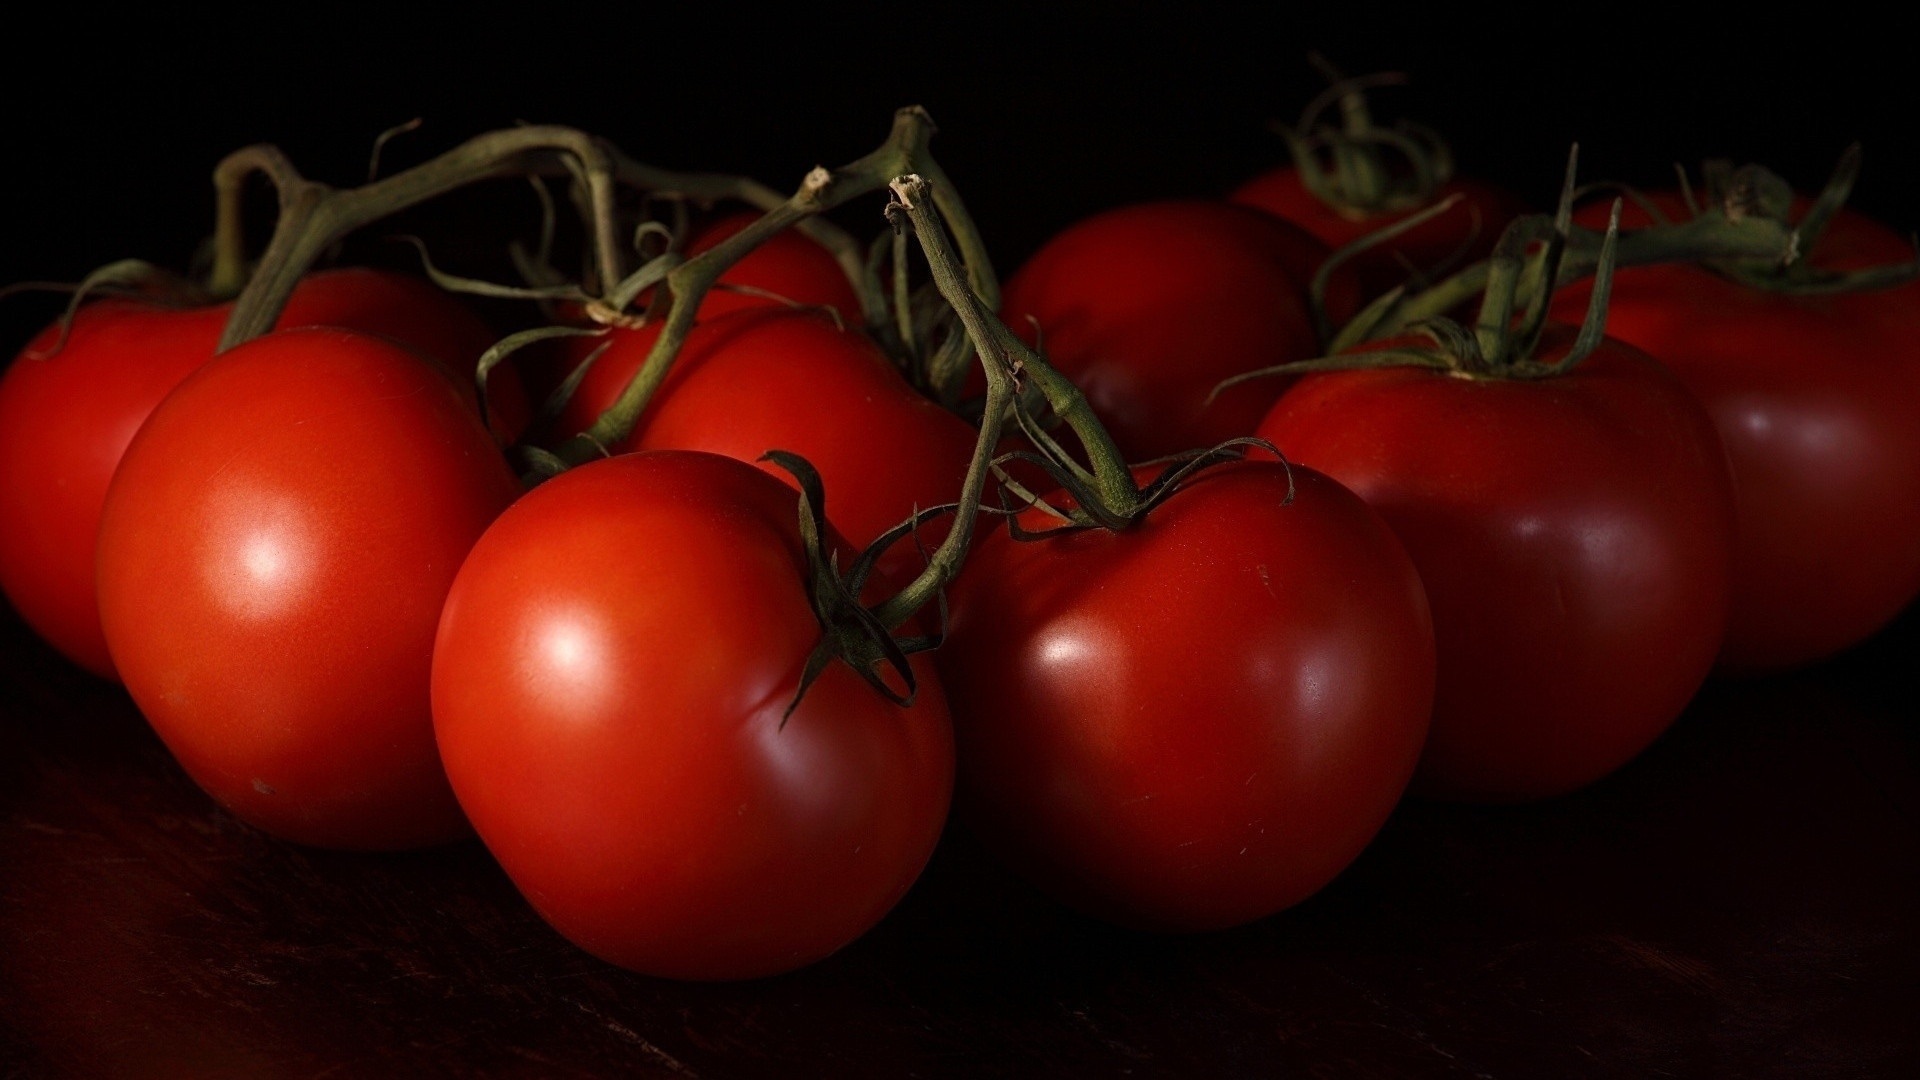 Tomato wallpapers collection, Visual variety, HD images, Desktop backgrounds, 1920x1080 Full HD Desktop